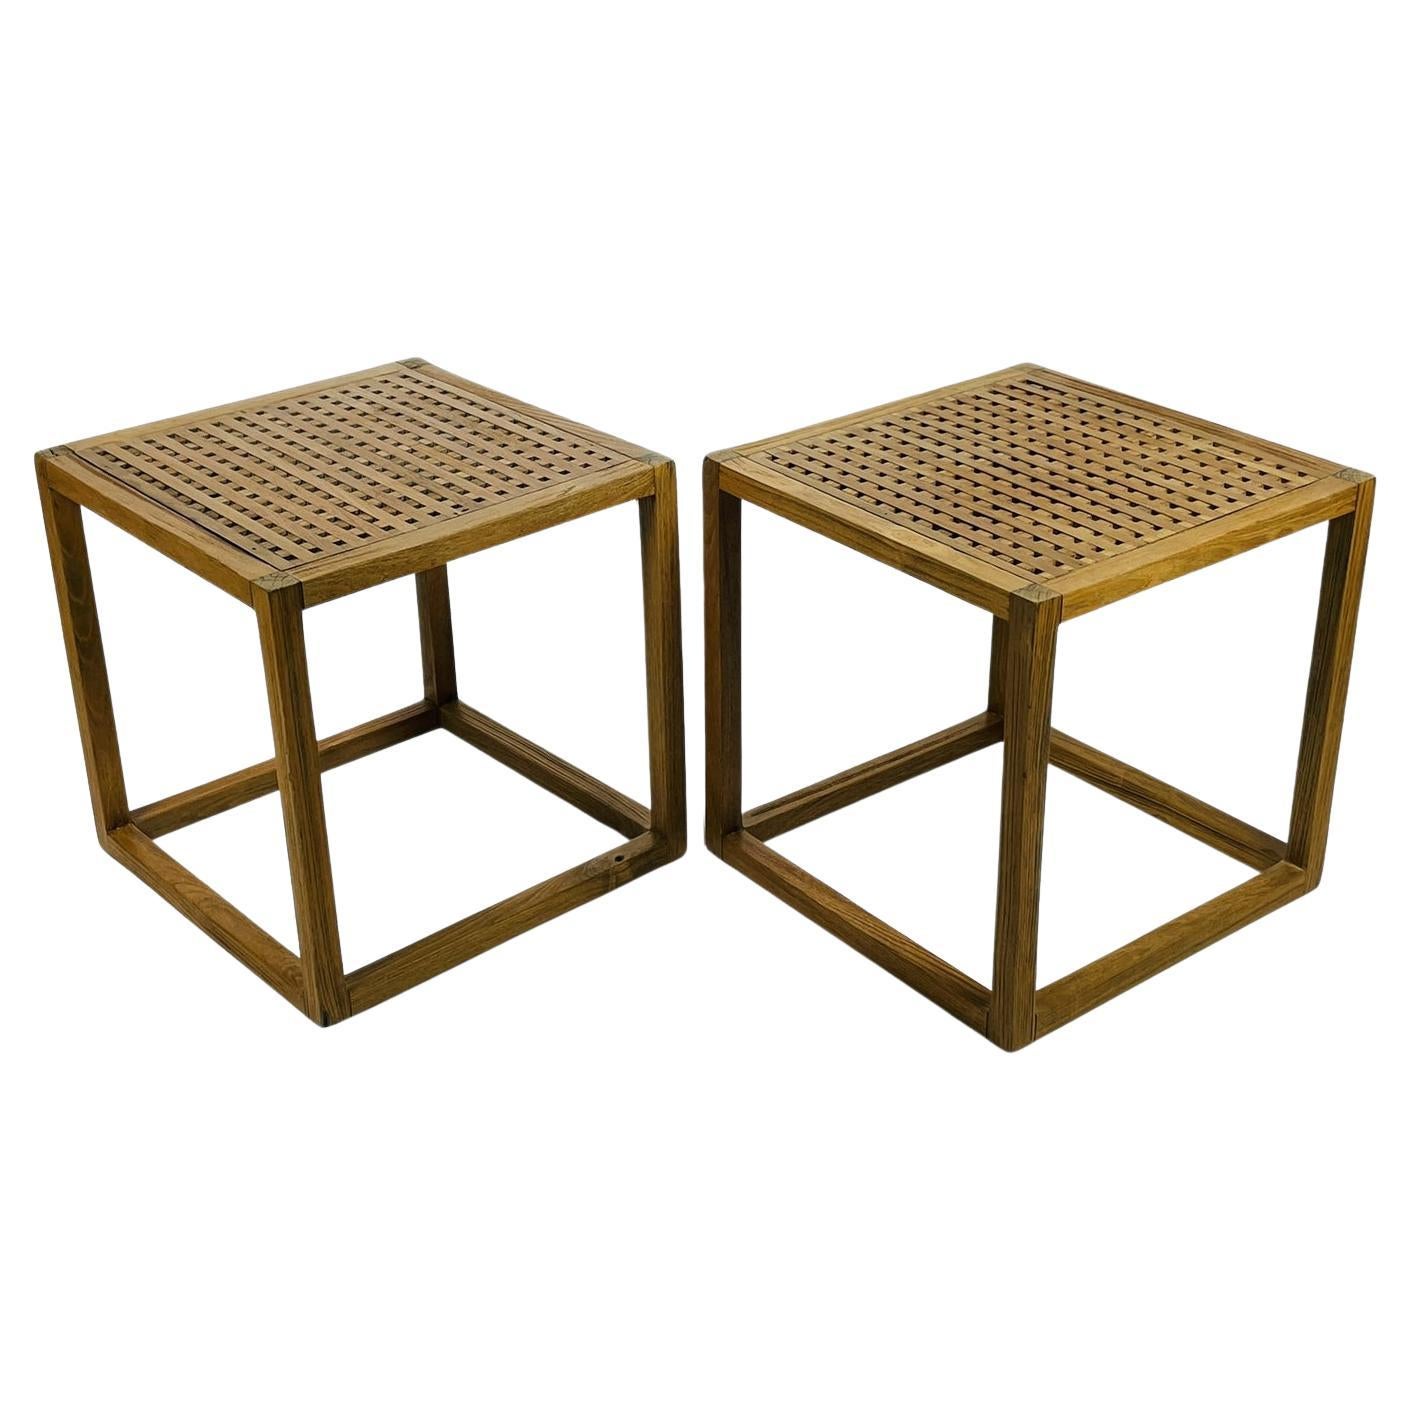 Pair of Teak Lattice Cube Tables by Summit Furniture For Sale